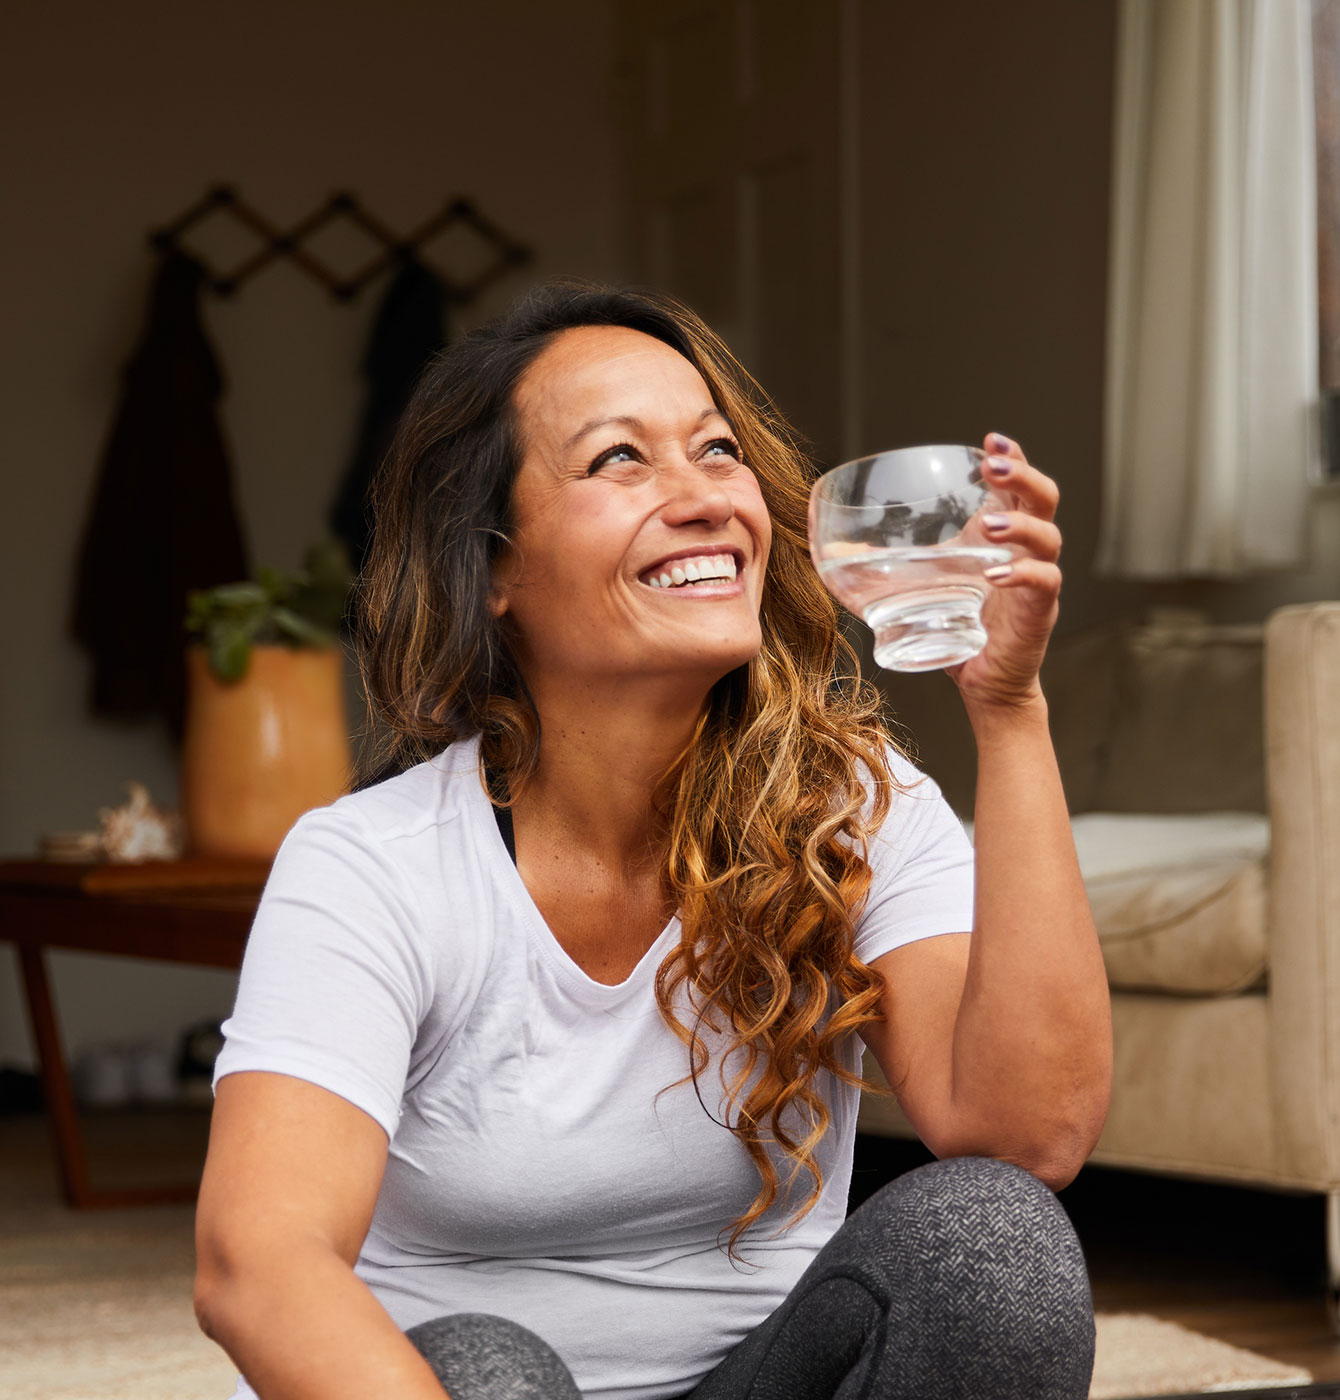 Photograph of a woman smiling while drinking from a glass of water